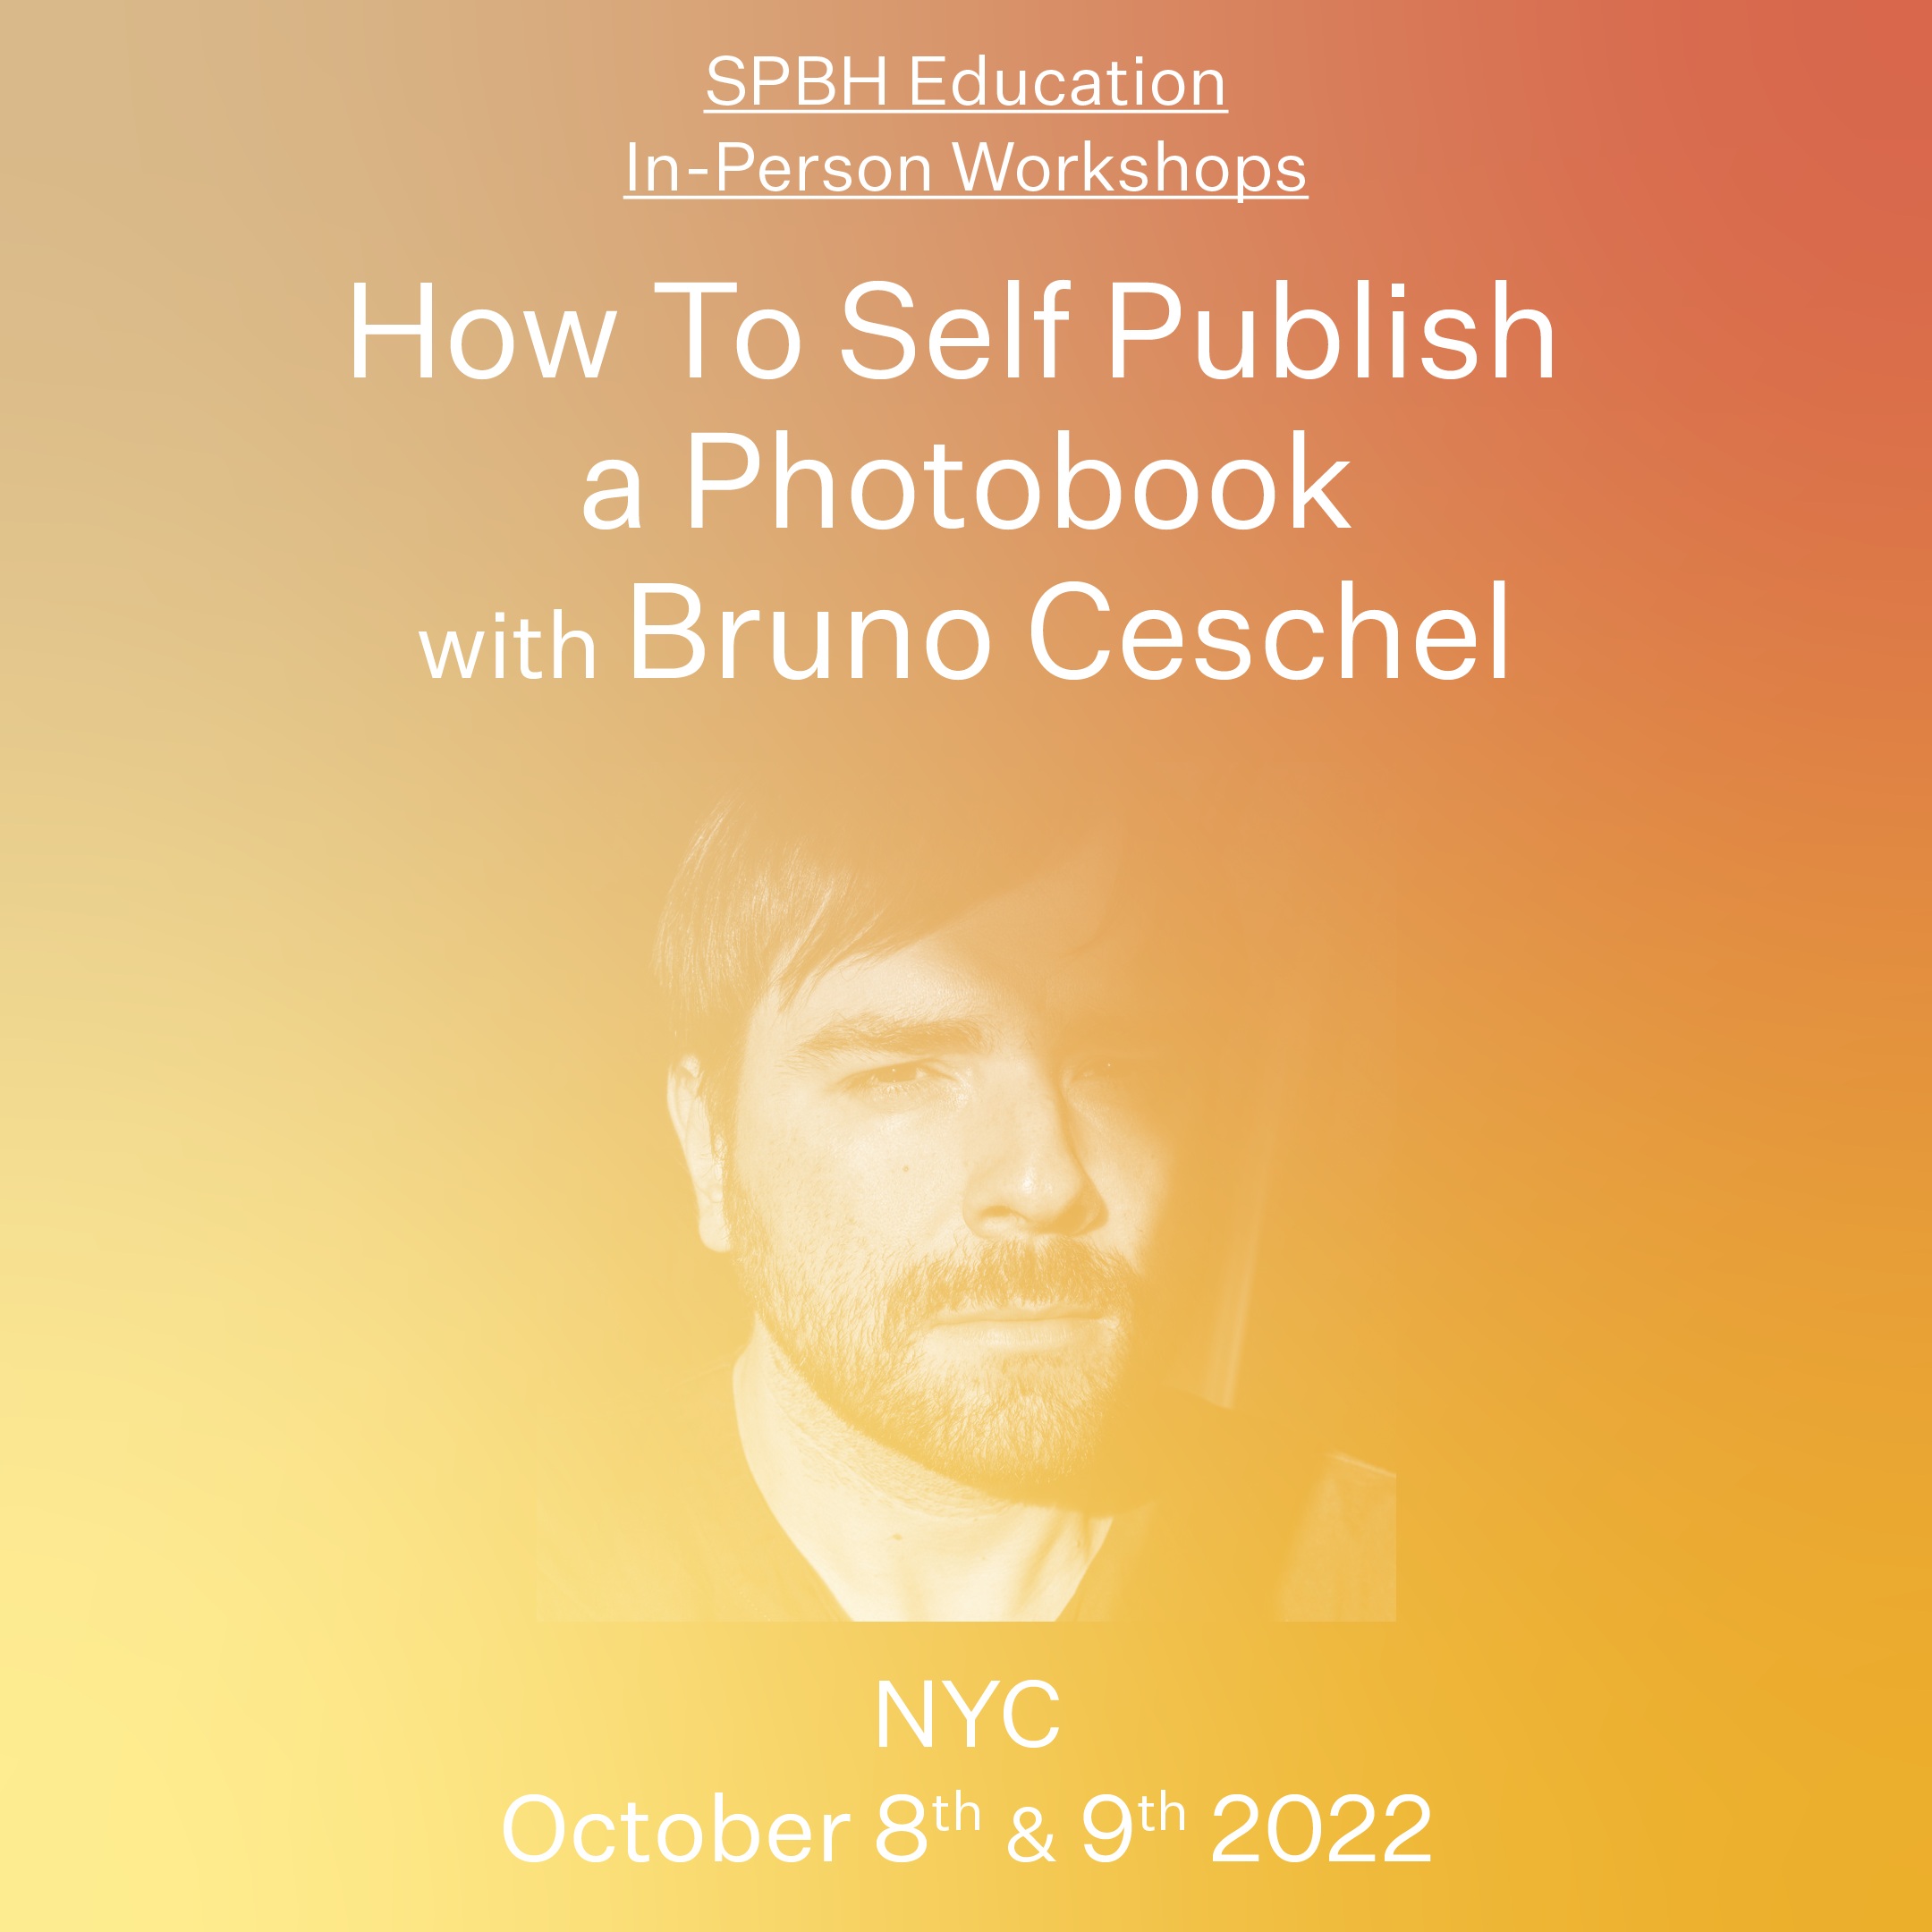 NYC WORKSHOP: How To Self Publish a Photobook with Bruno Ceschel